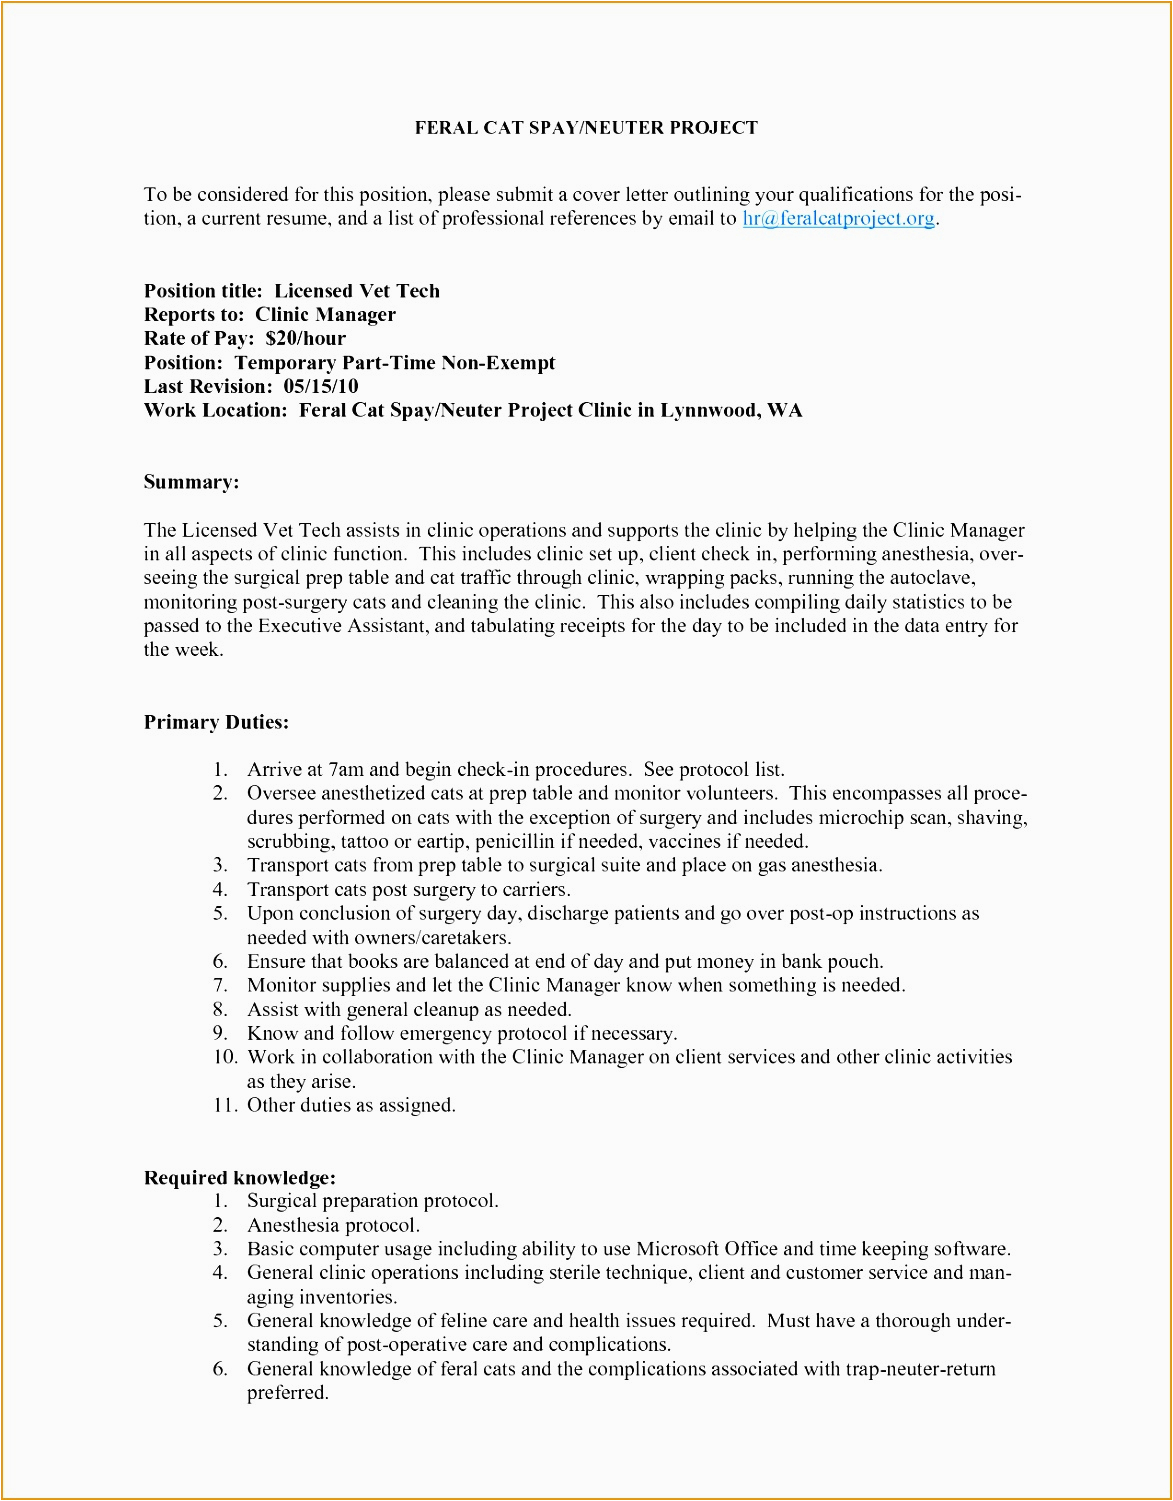 Sample Cover Letter for Resume with Salary Requirements 5 Salary Requirements Cover Letter Free Samples